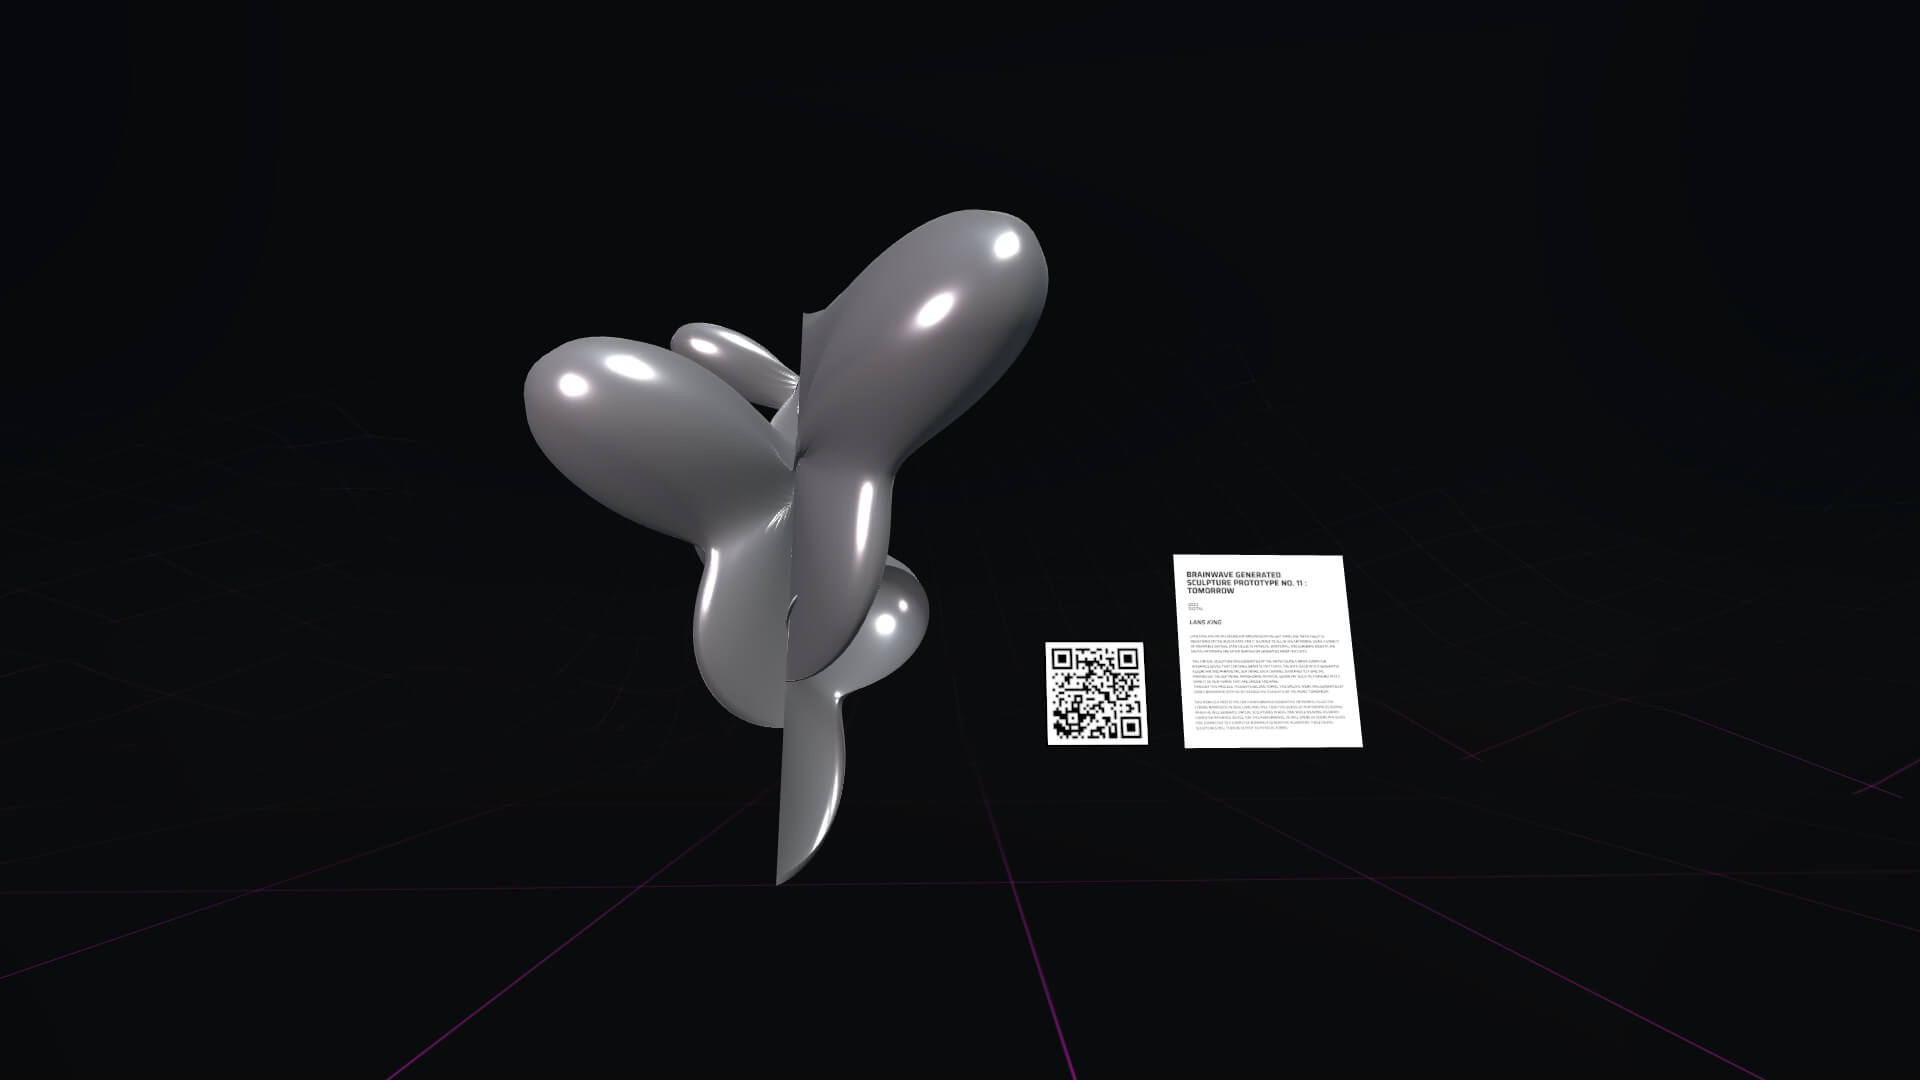 A still image of a scene in the metaverse, showing a gray sculpture with its QR code and label